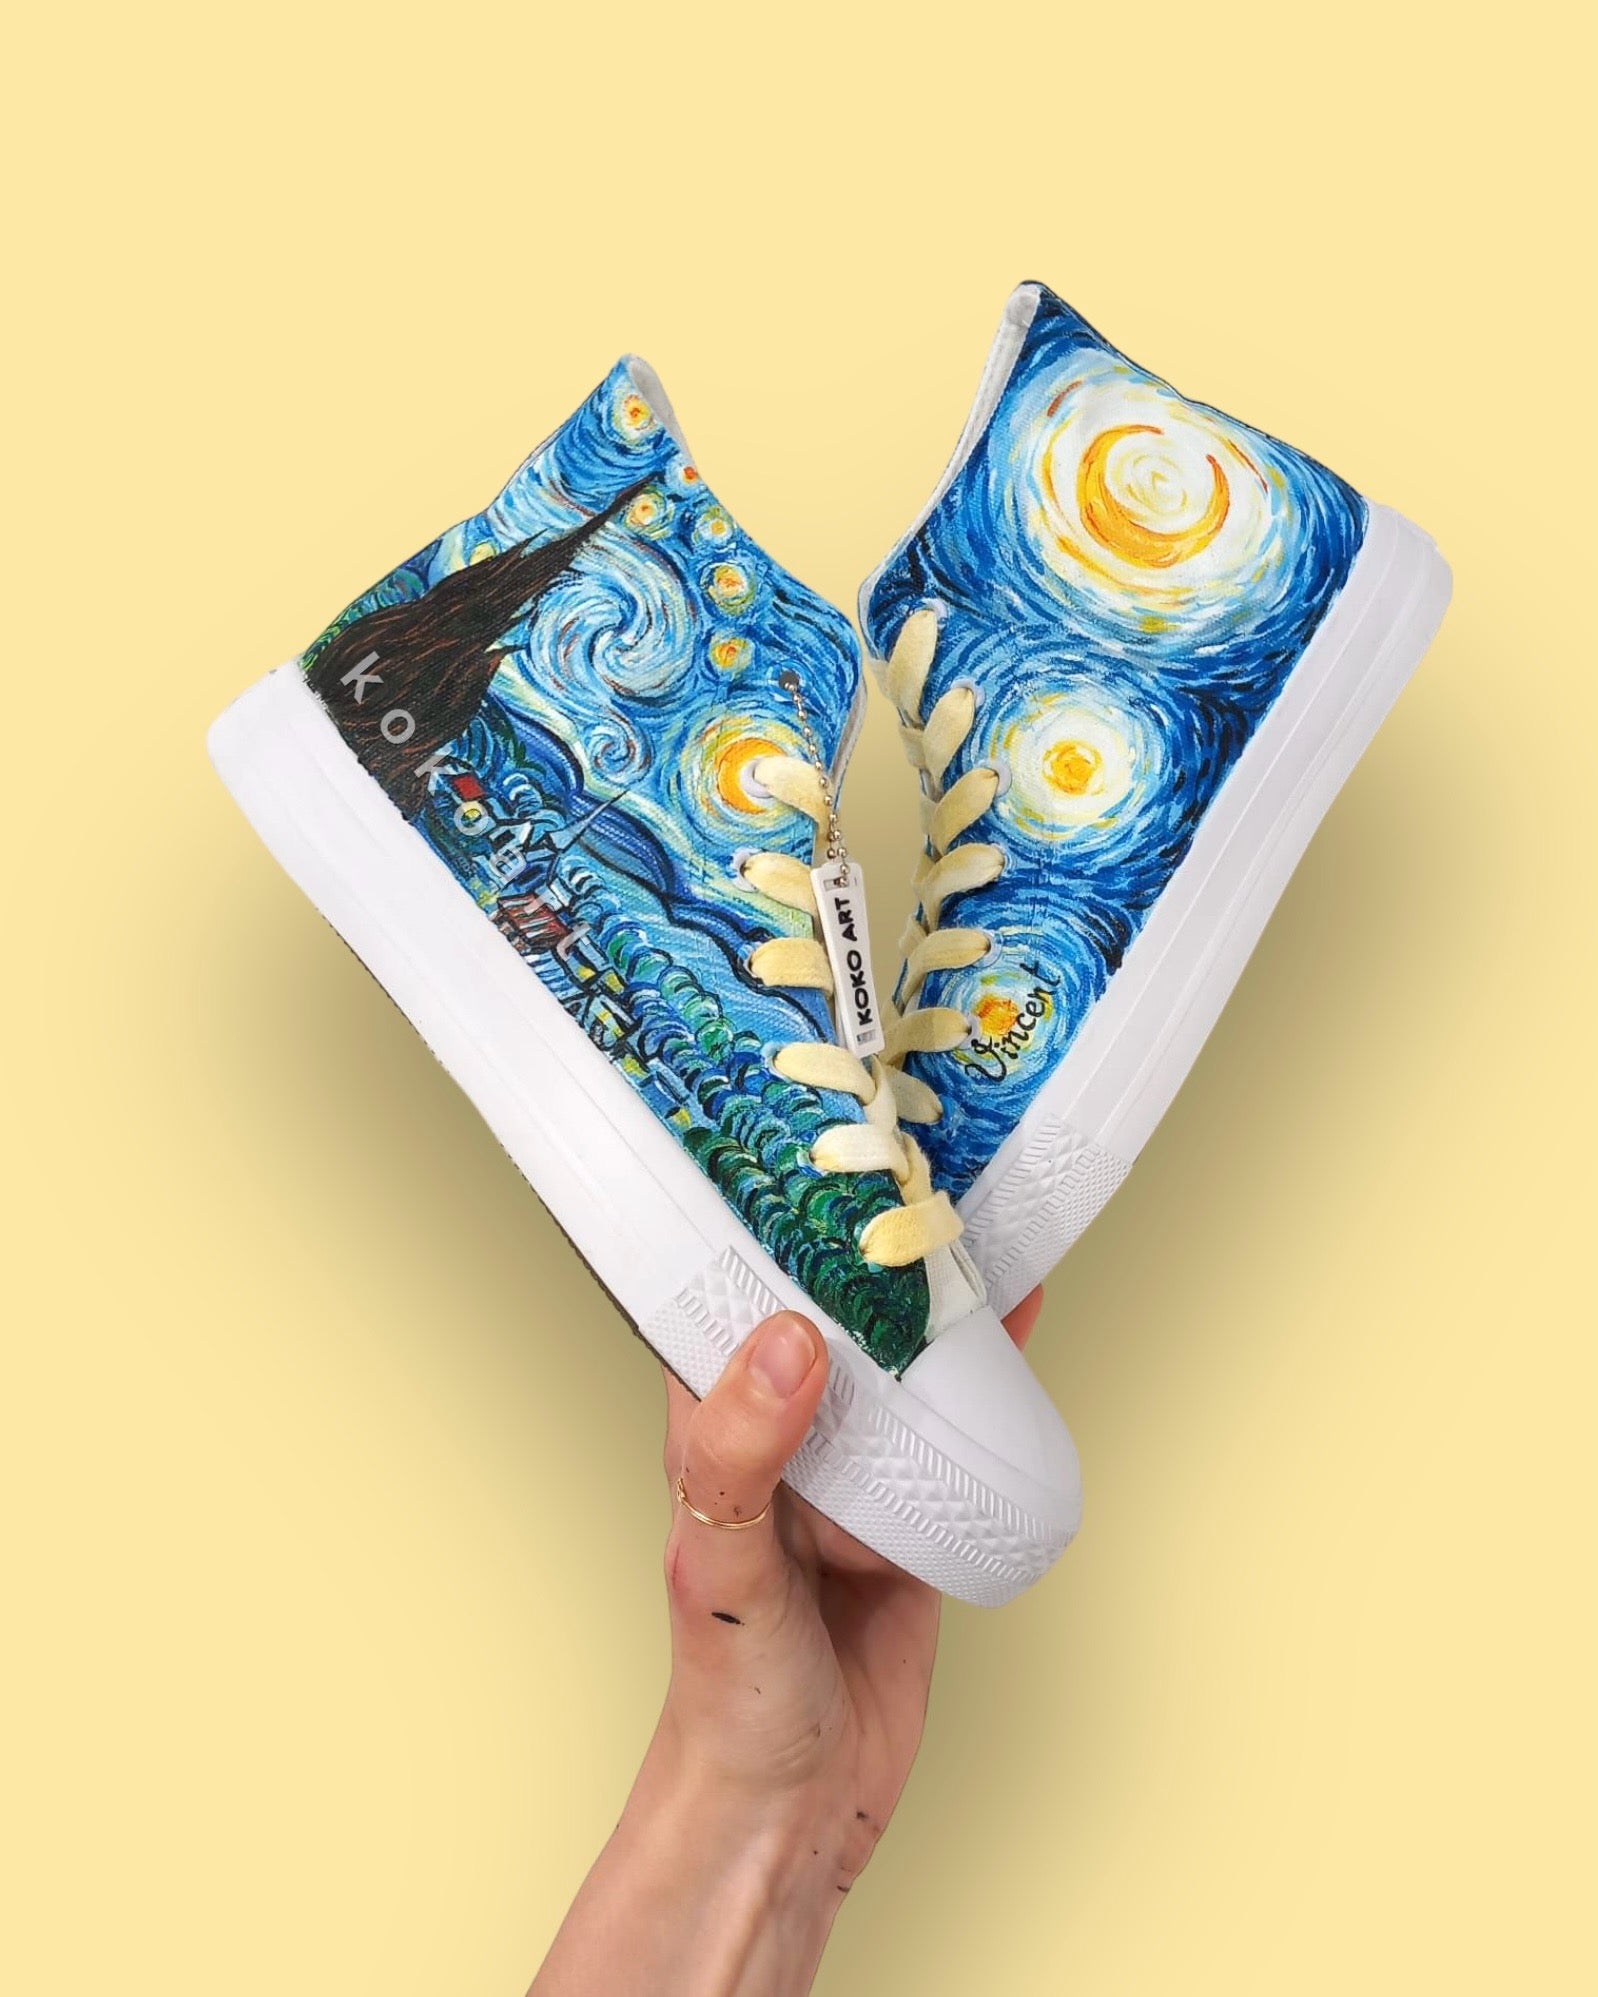 Van Gogh Starry Night Hand Painted Shoes